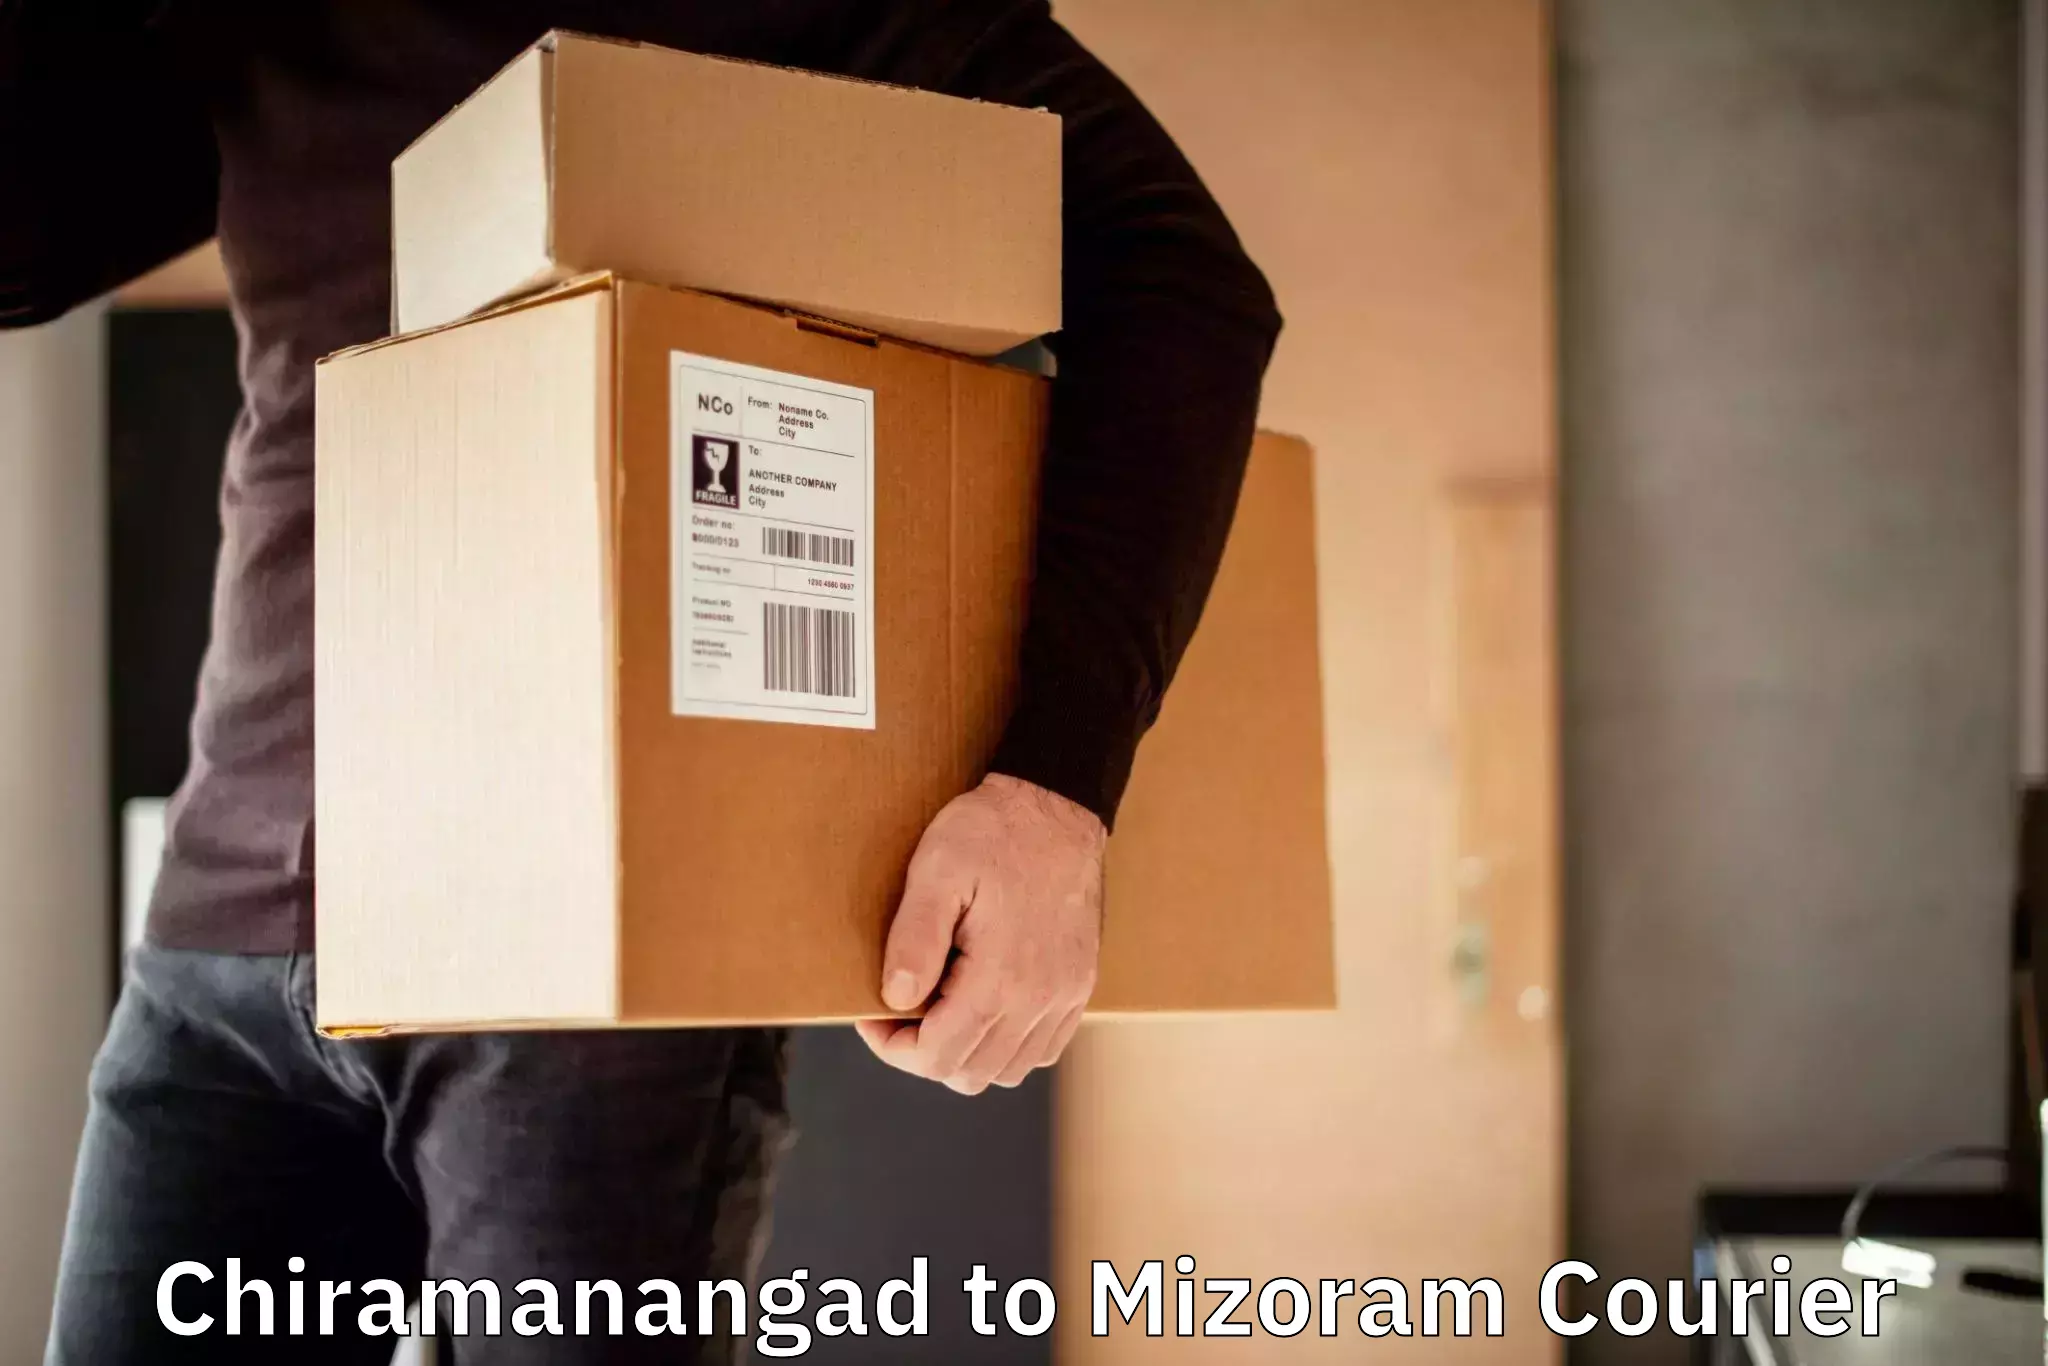 Same-day delivery solutions Chiramanangad to Siaha